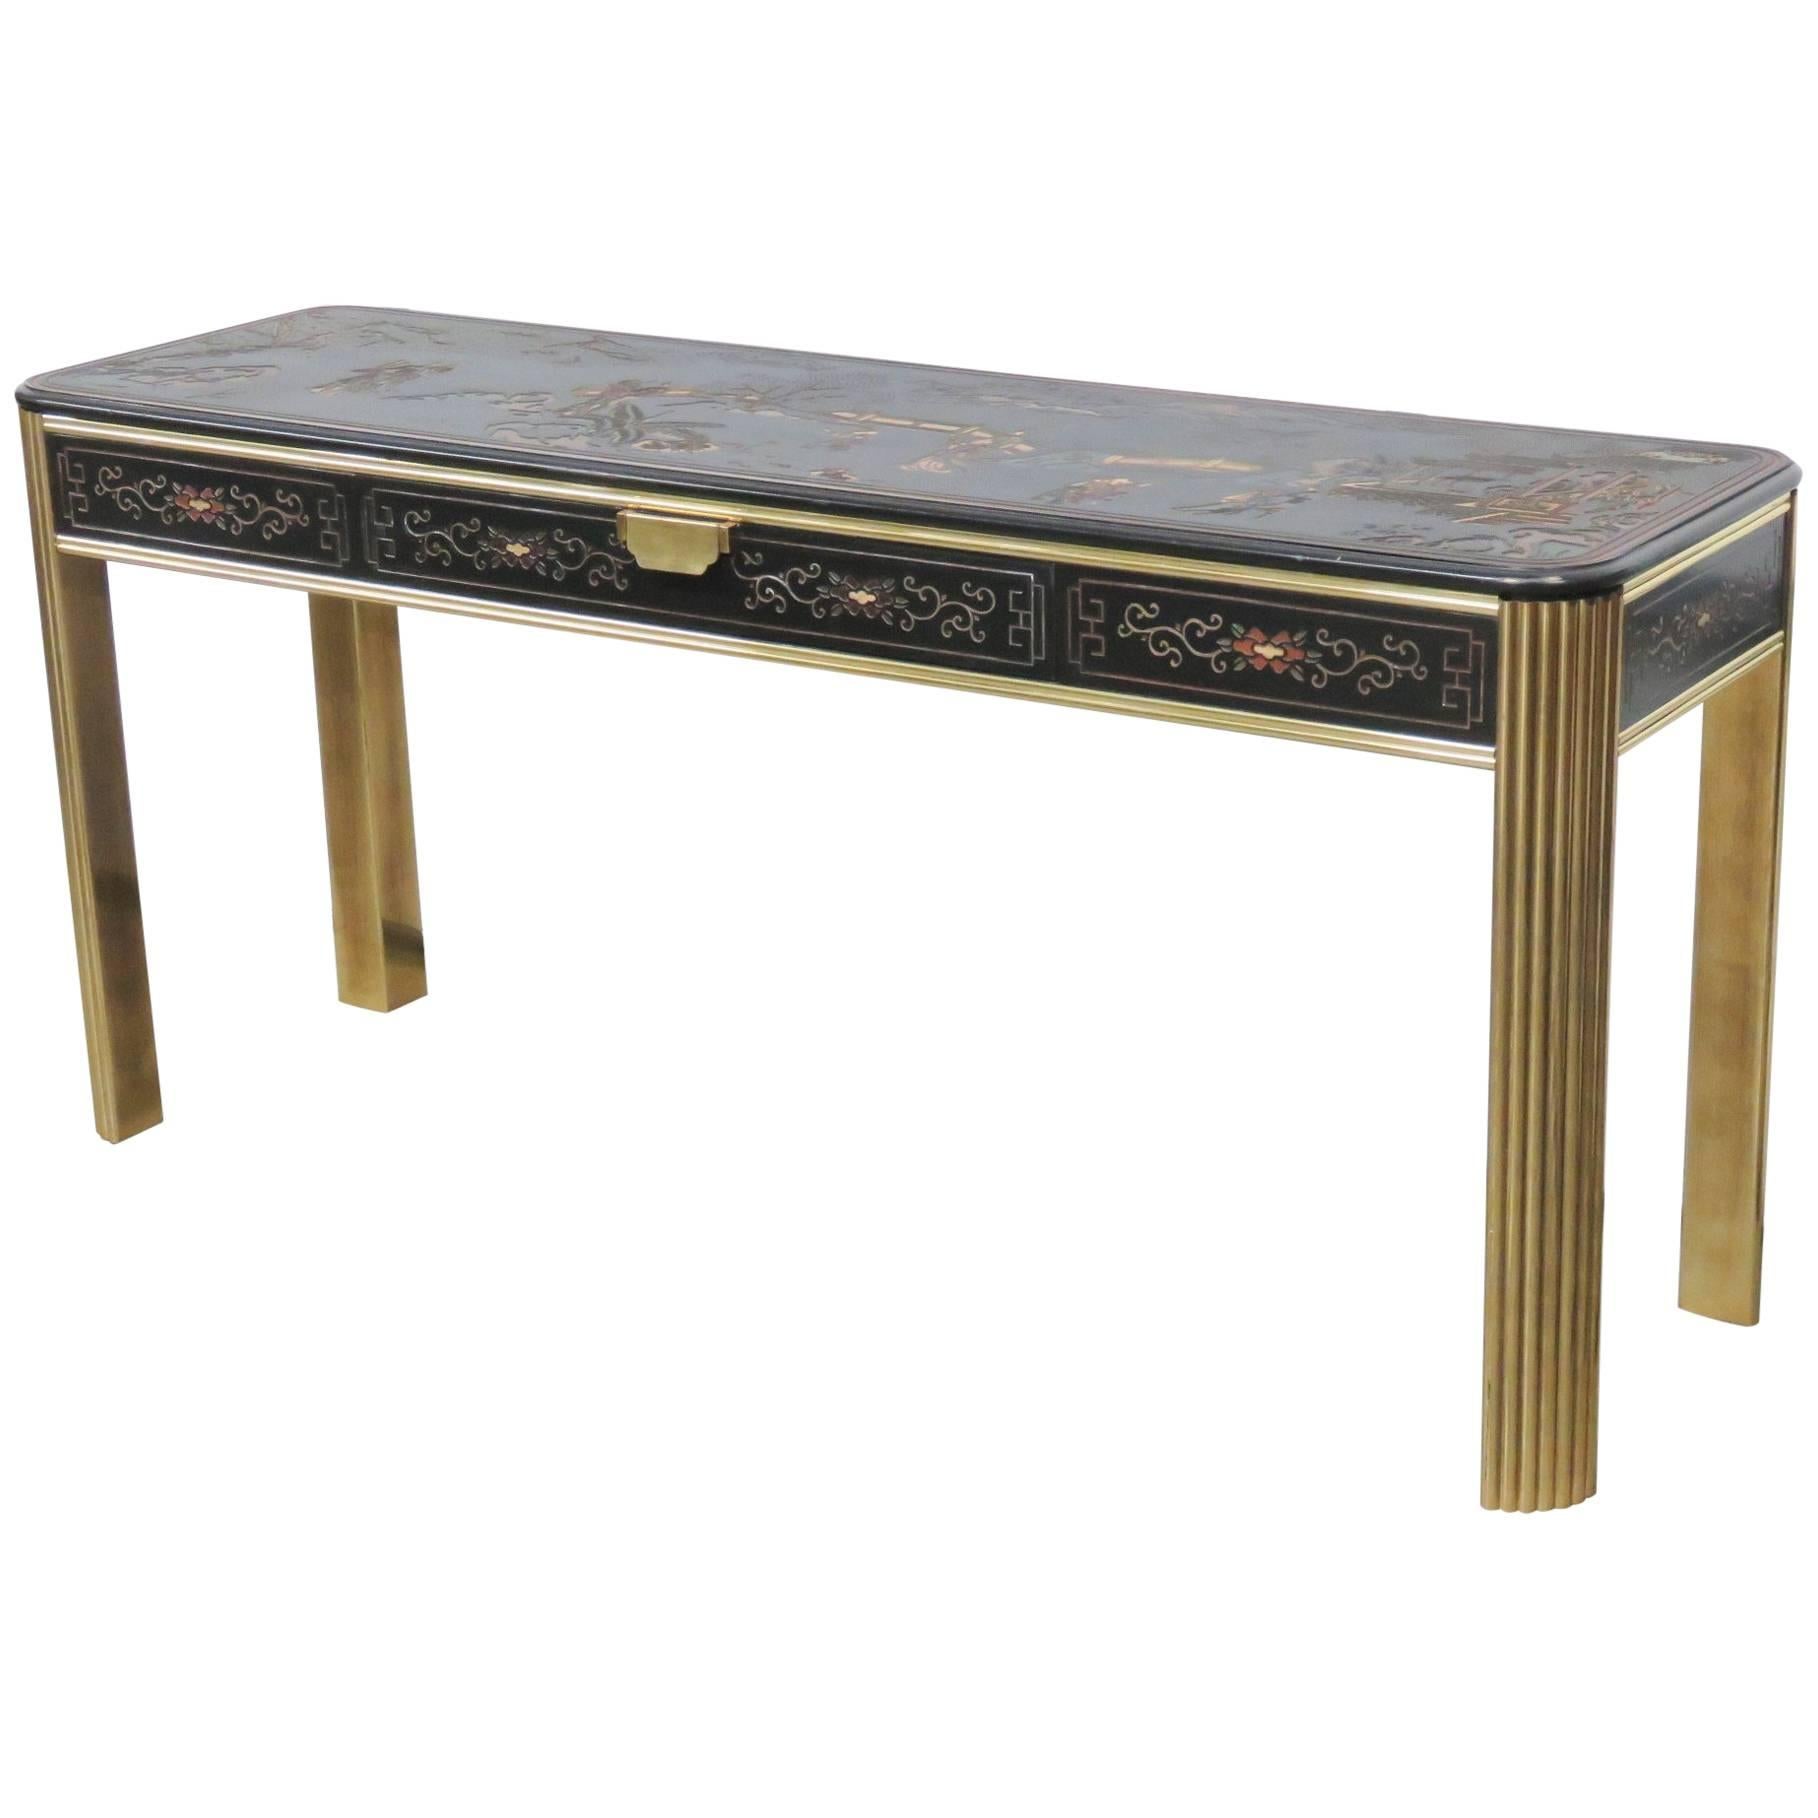 Mastercraft Style Chinoiserie Decorated Brass Console Sofa Table 